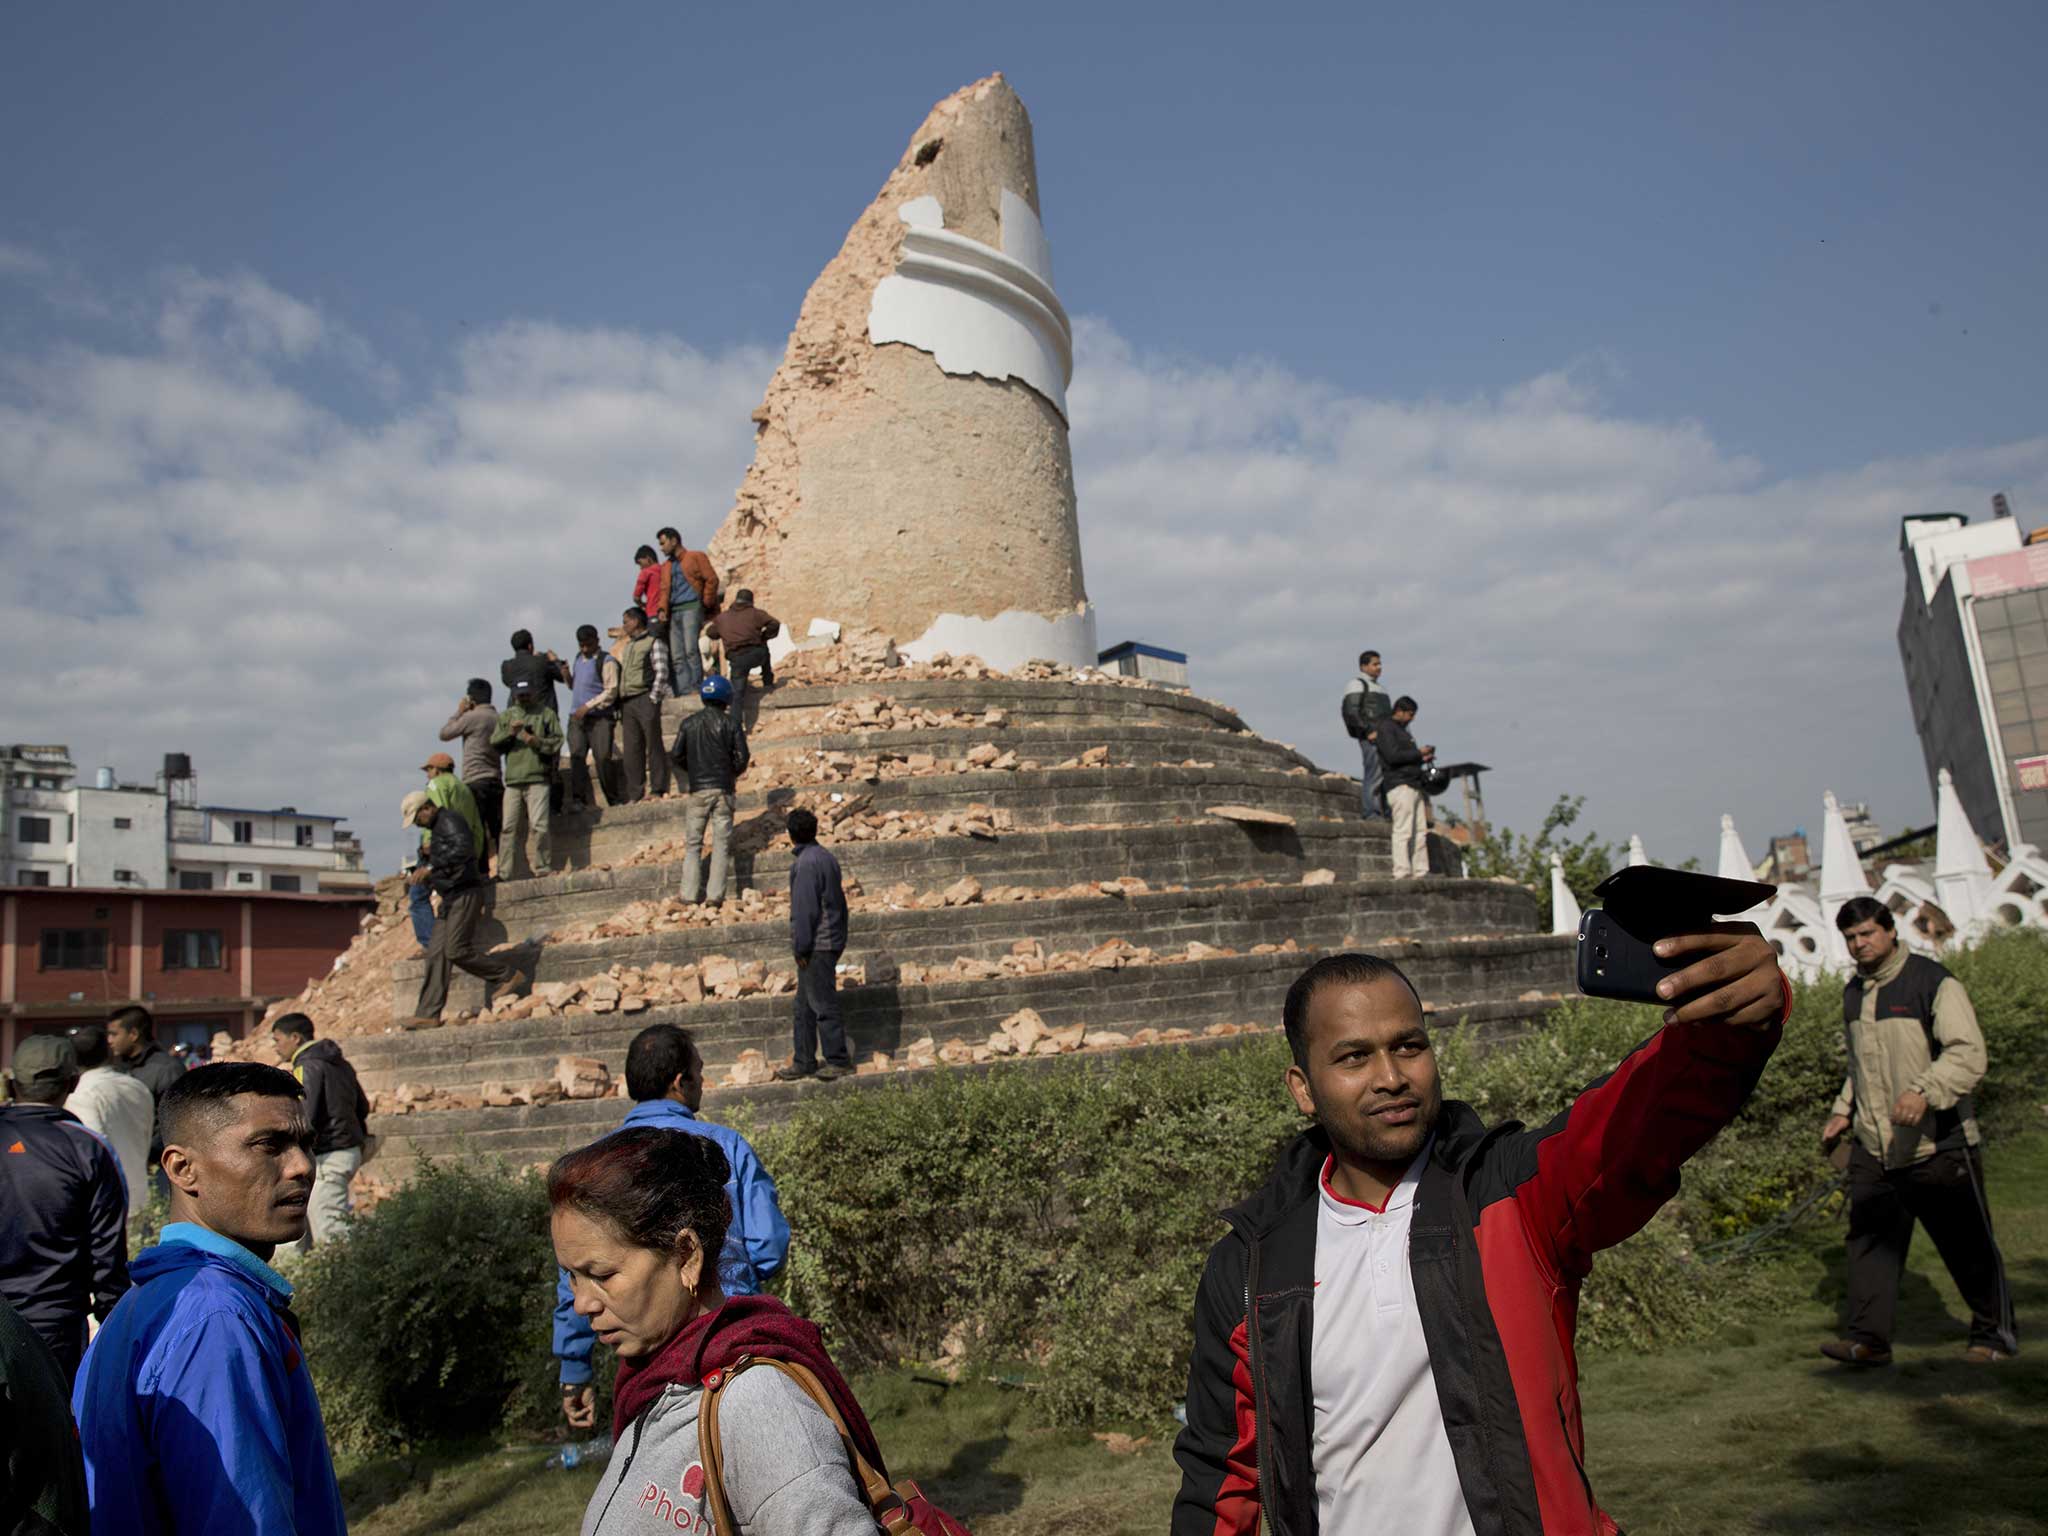 A man appears to take a selfie in front of the destroyed Dharahara Tower